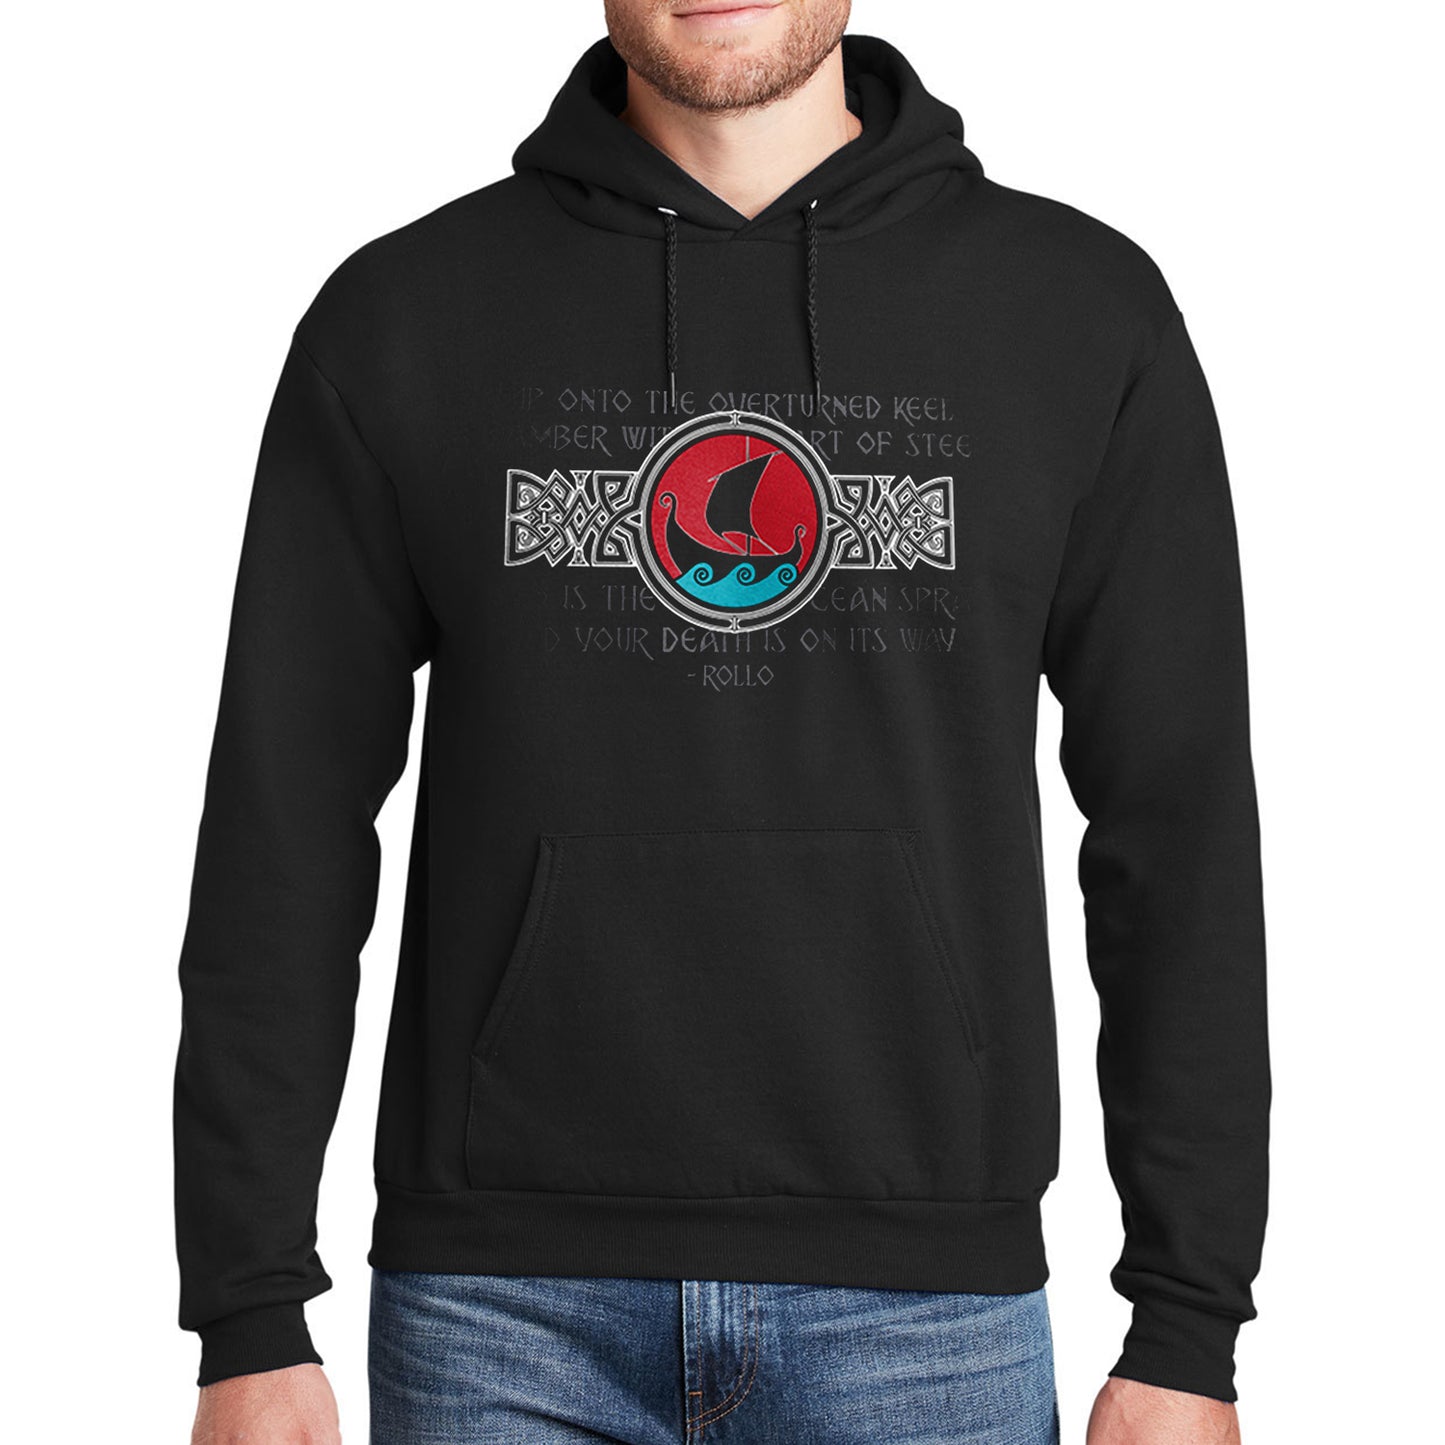 A black hoodie. The design features a red circle containing a black viking ship sillhouette and blue ocean waves. On either side of the circle is a black and white rectangular Viking-style filigree design. In the background in a faded black-on-black font is the "overturned keel" Rollo quote. 